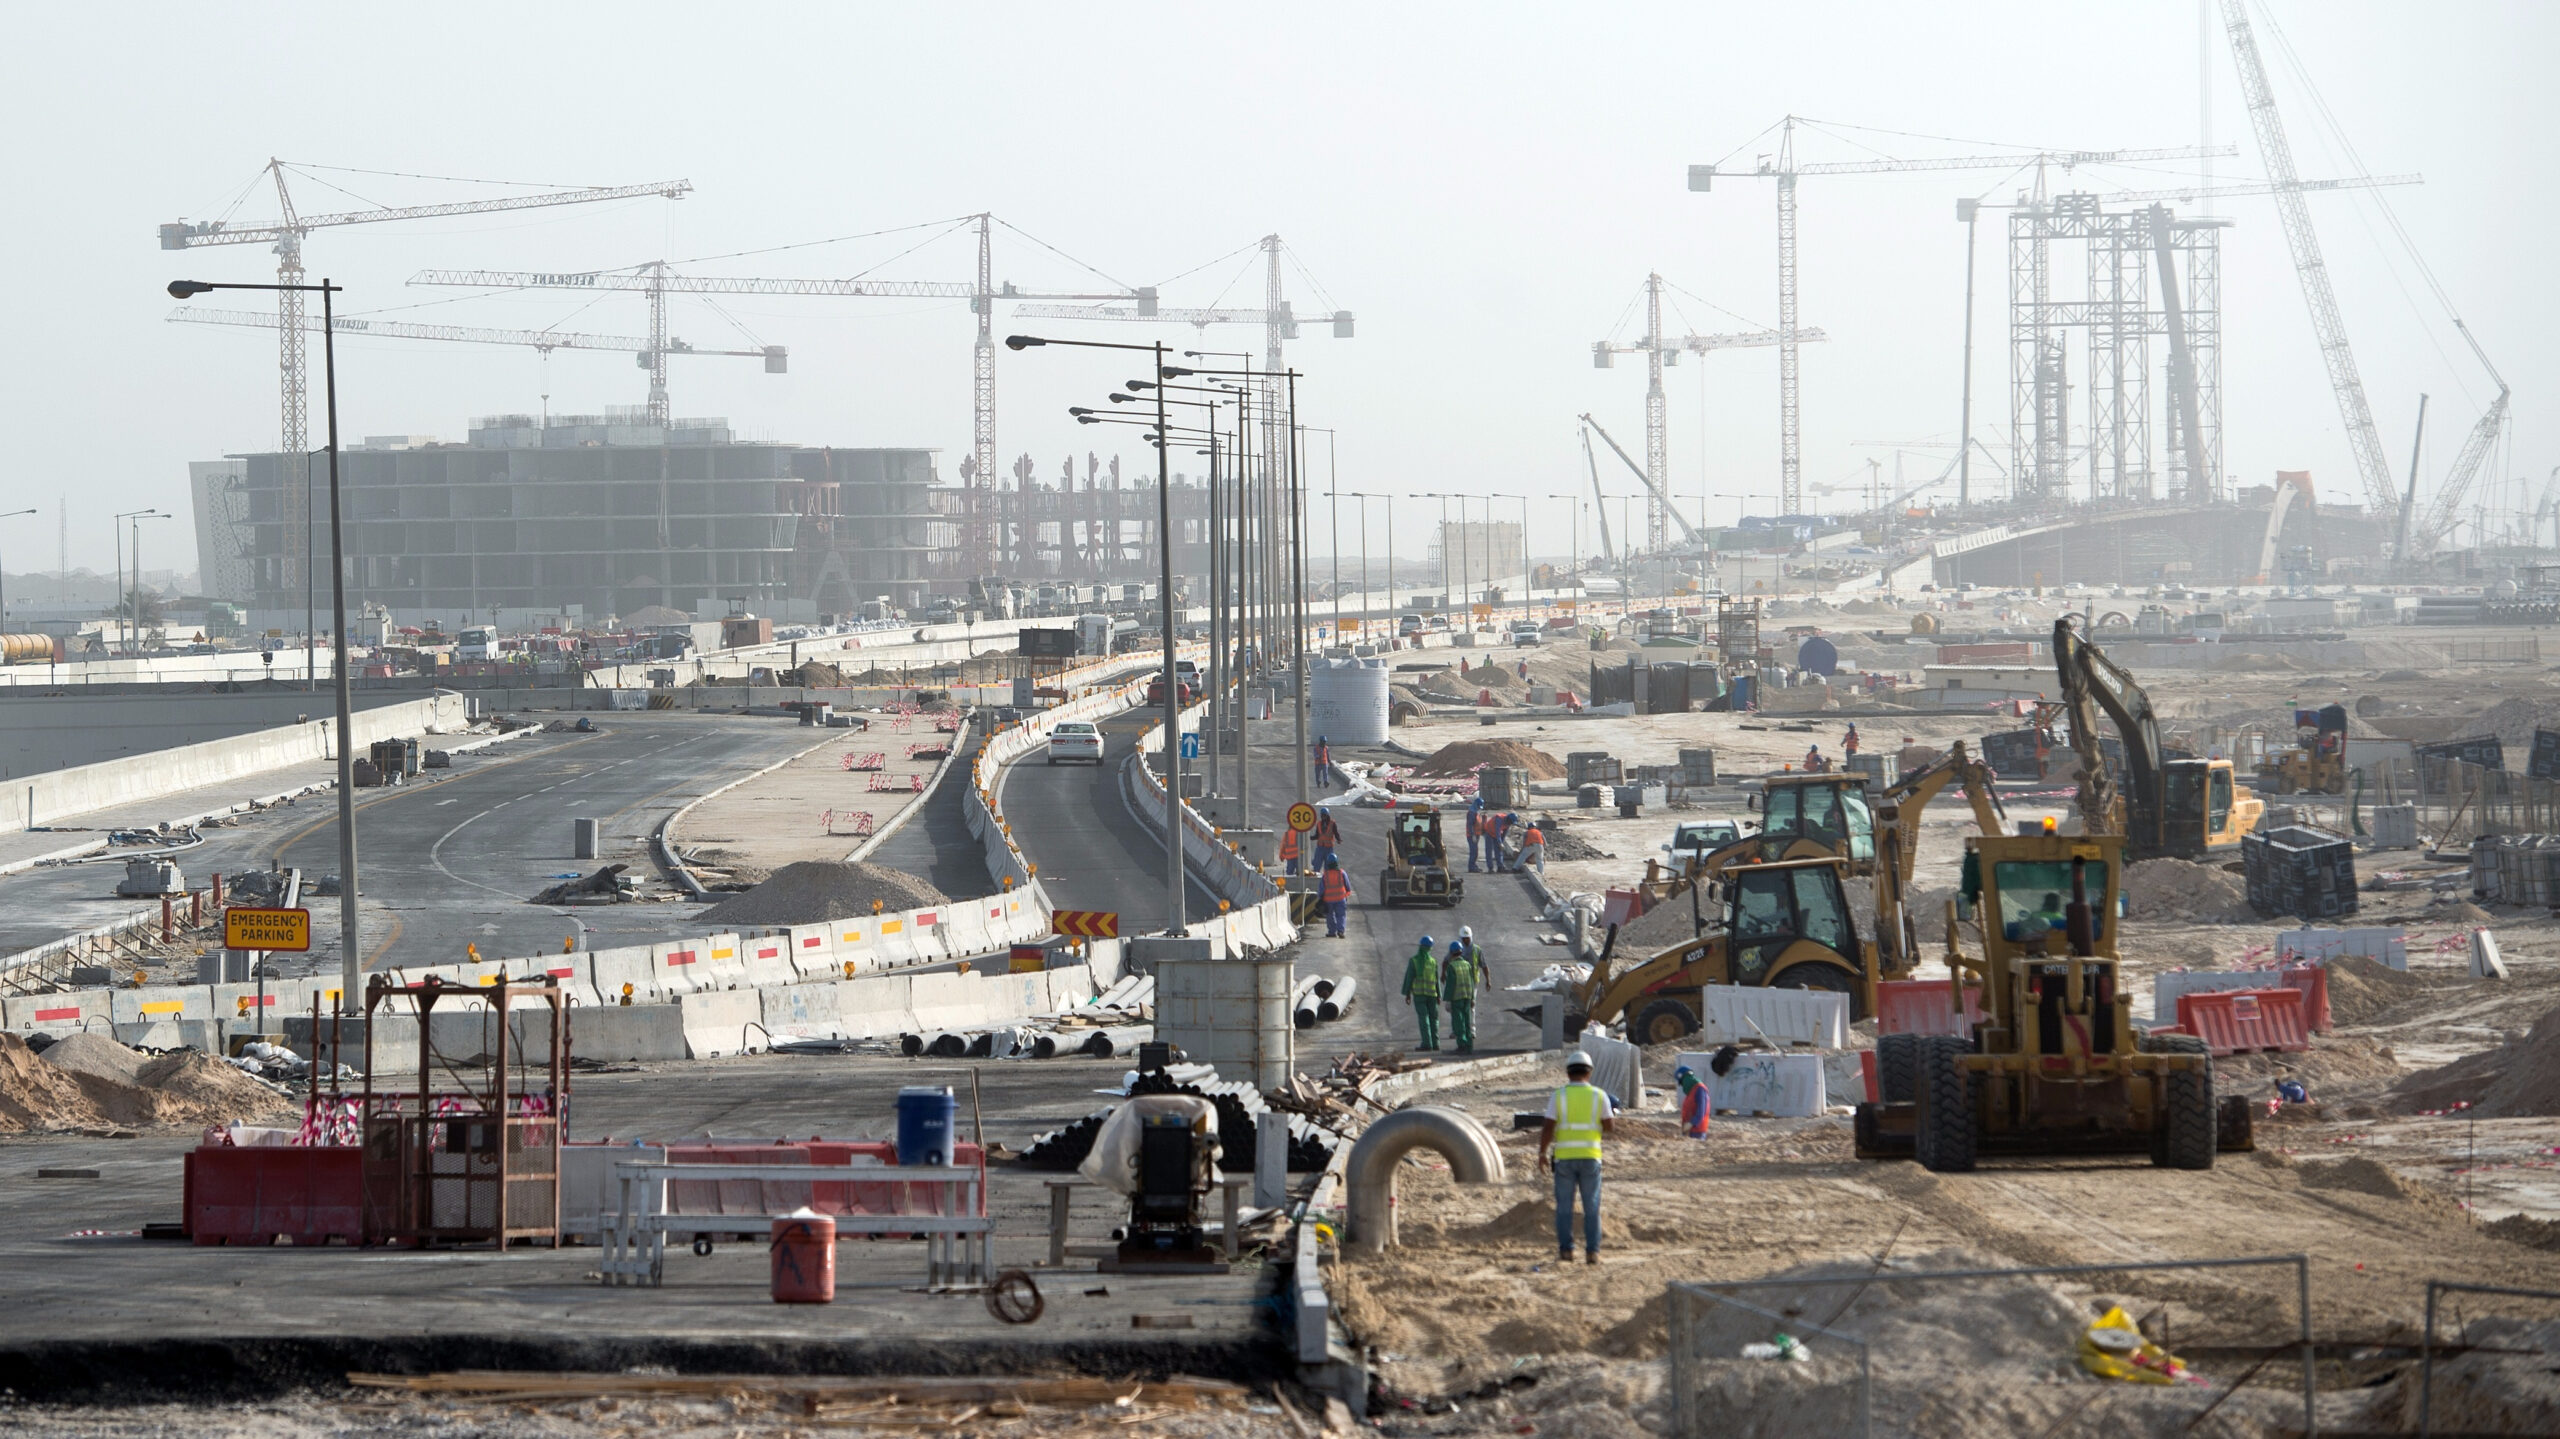 Fifa 2022 World Cup: Is Qatar Doing Enough To Save Migrant